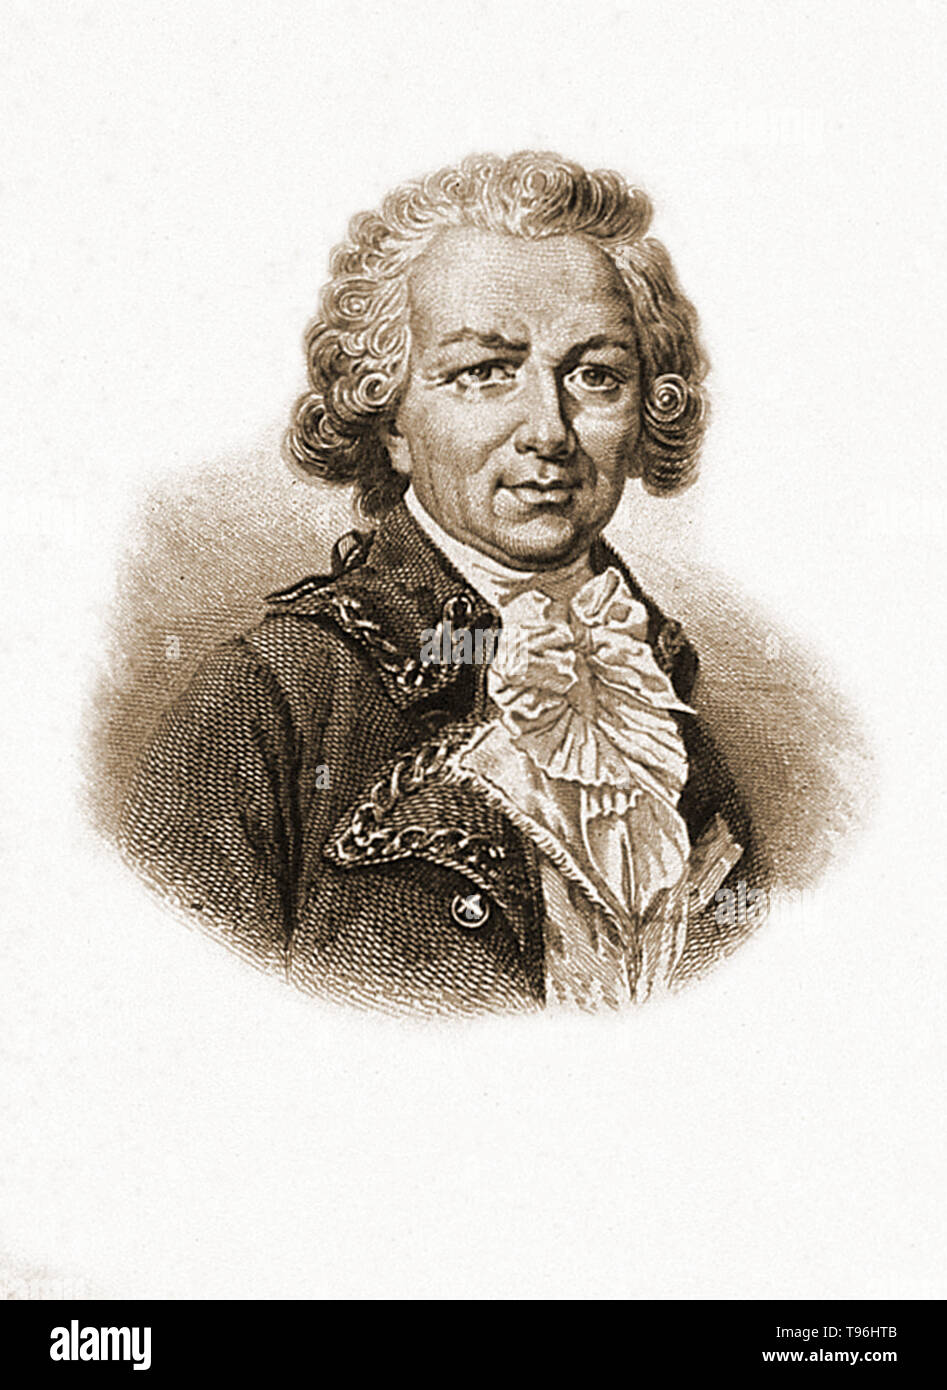 Louis-Antoine, Comte de Bougainville (1729-1811) was a French admiral and explorer. A contemporary of the British explorer James Cook, he took part in the Seven Years' War in North America and the American Revolutionary War against Britain. Bougainville later gained fame for his expeditions, including circumnavigation of the globe in a scientific expedition in 1763, the first recorded settlement on the Falkland Islands, and voyages into the Pacific Ocean. Bougainville Island of Papua New Guinea was named for him. Stock Photo